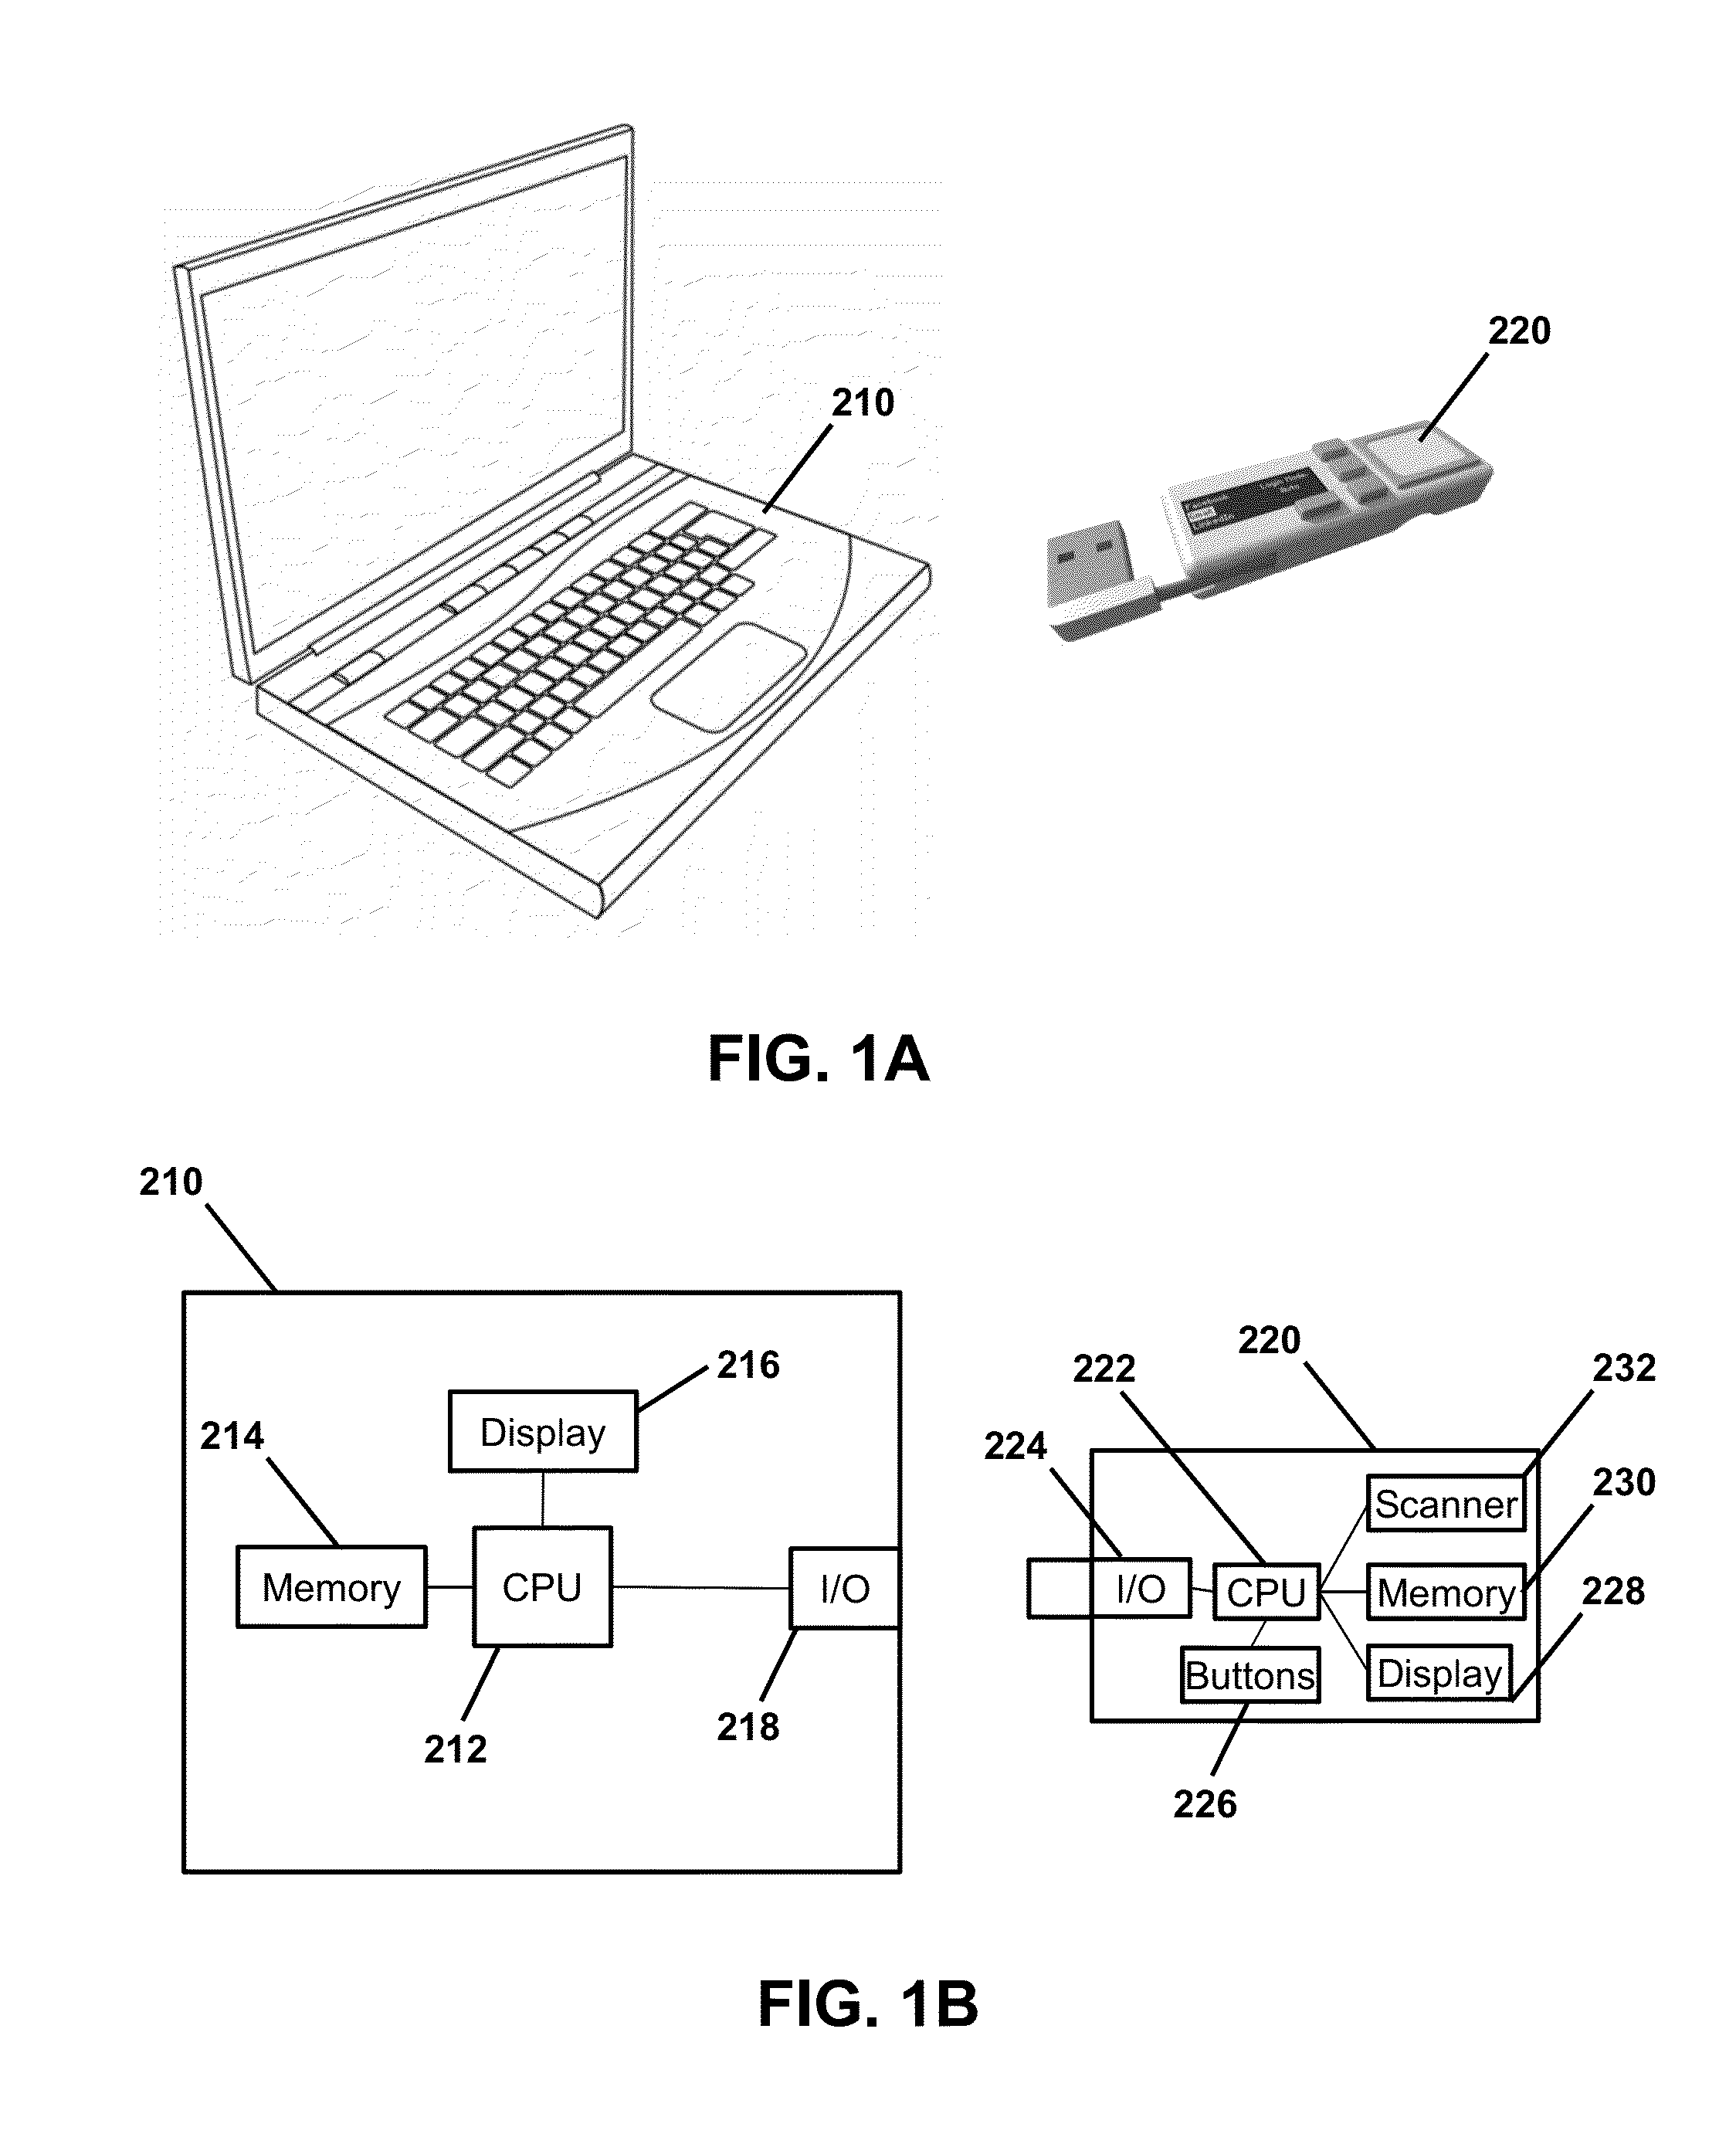 Systems, methods, and apparatuses for securely accessing user accounts